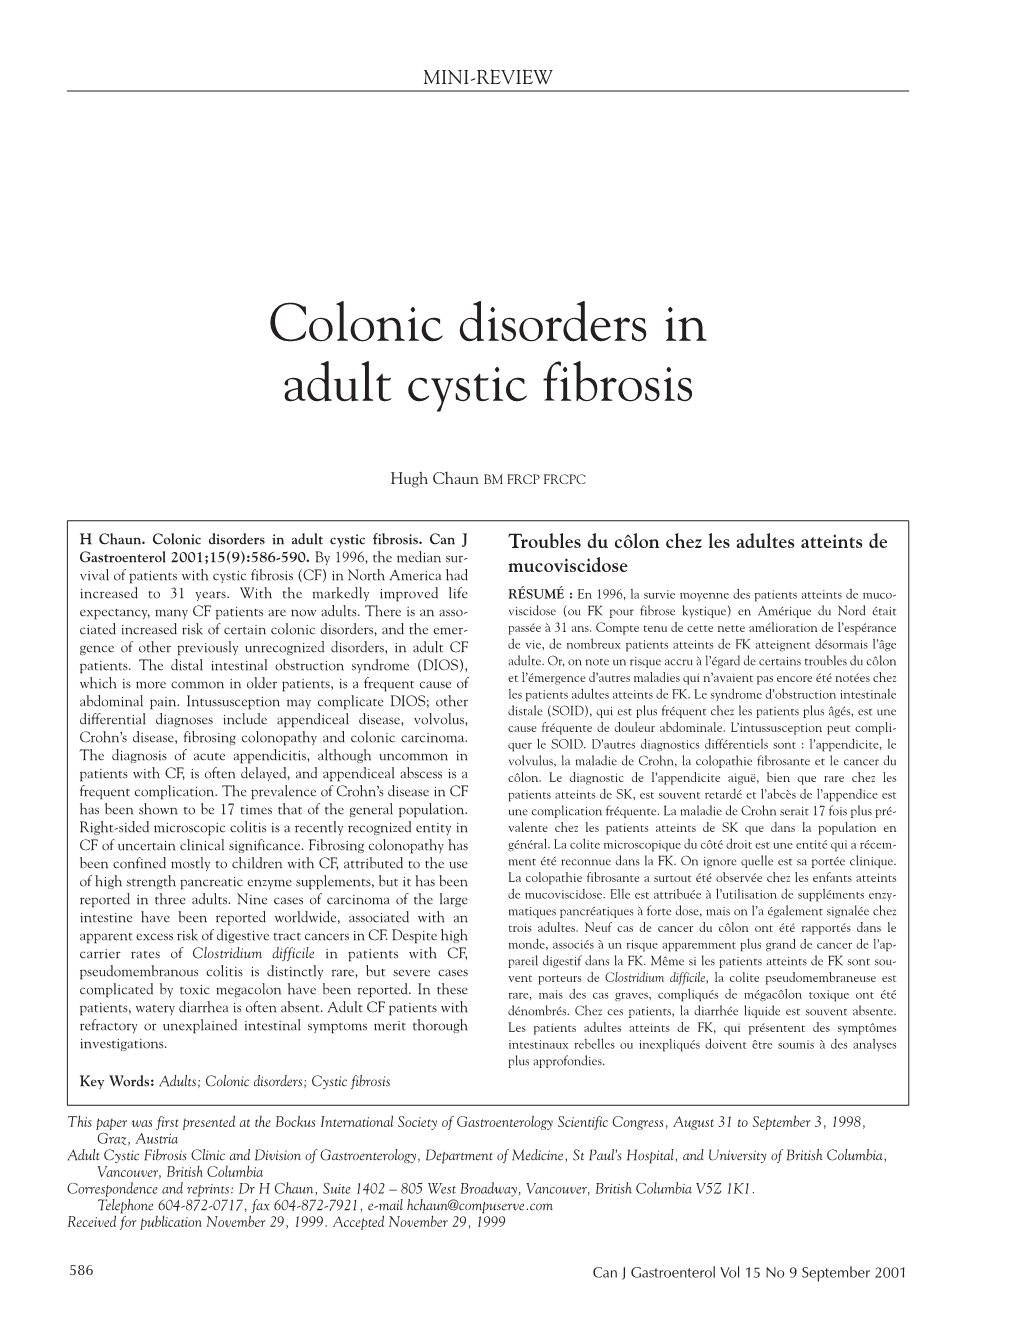 Colonic Disorders in Adult Cystic Fibrosis